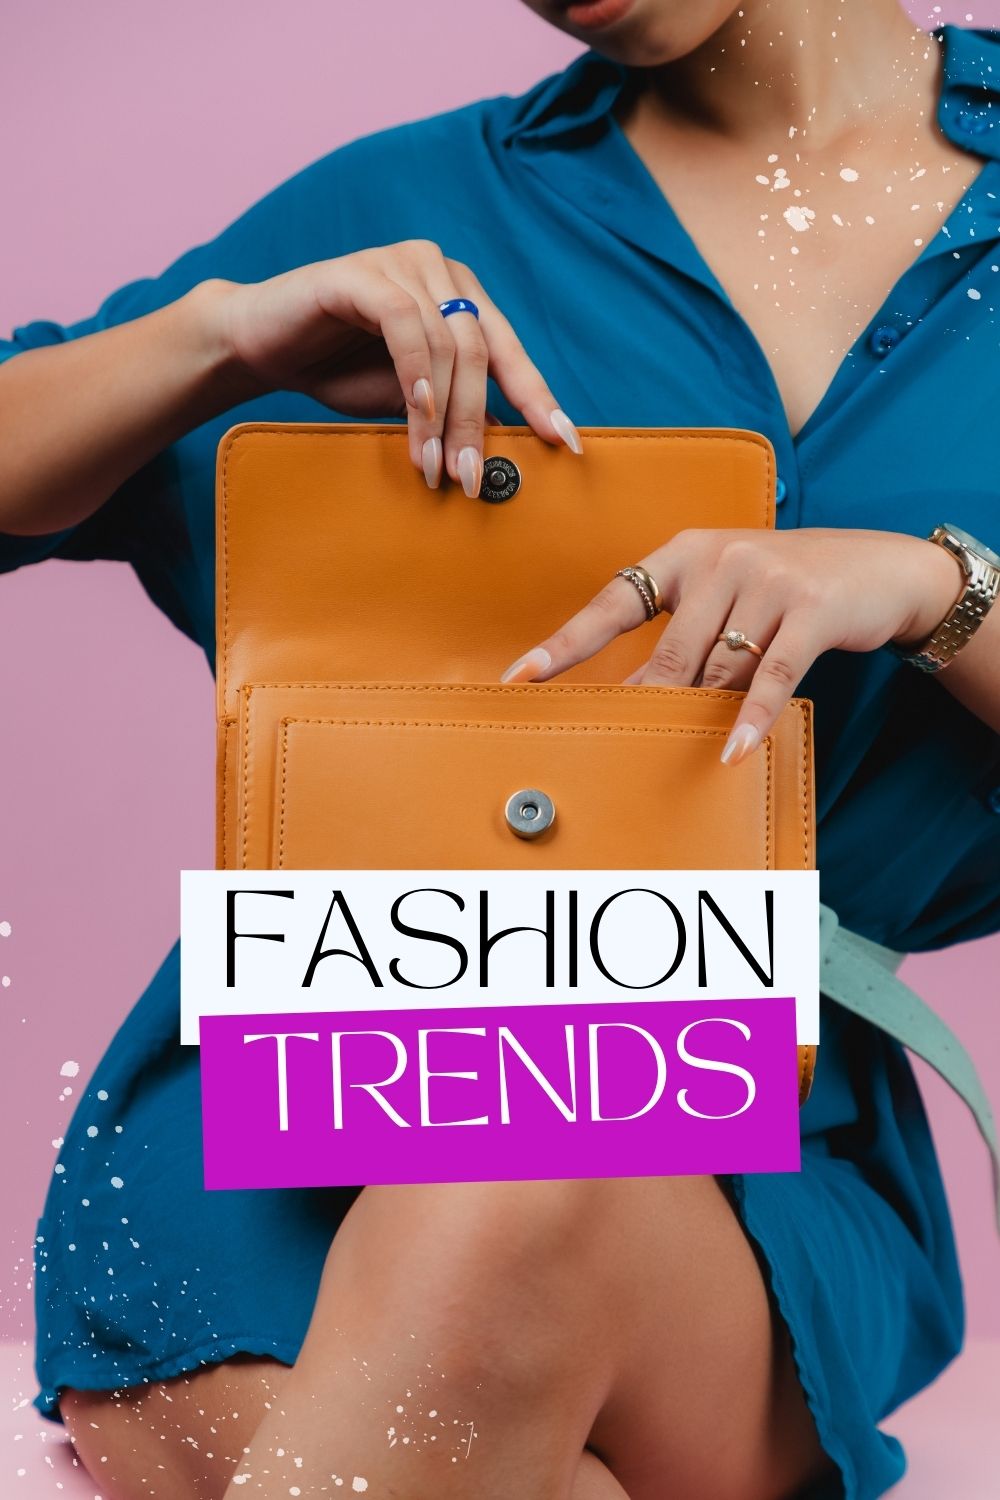 Fashion Trends and Seasonal Wear: What’s In For Spring, Summer, Fall, and Winter